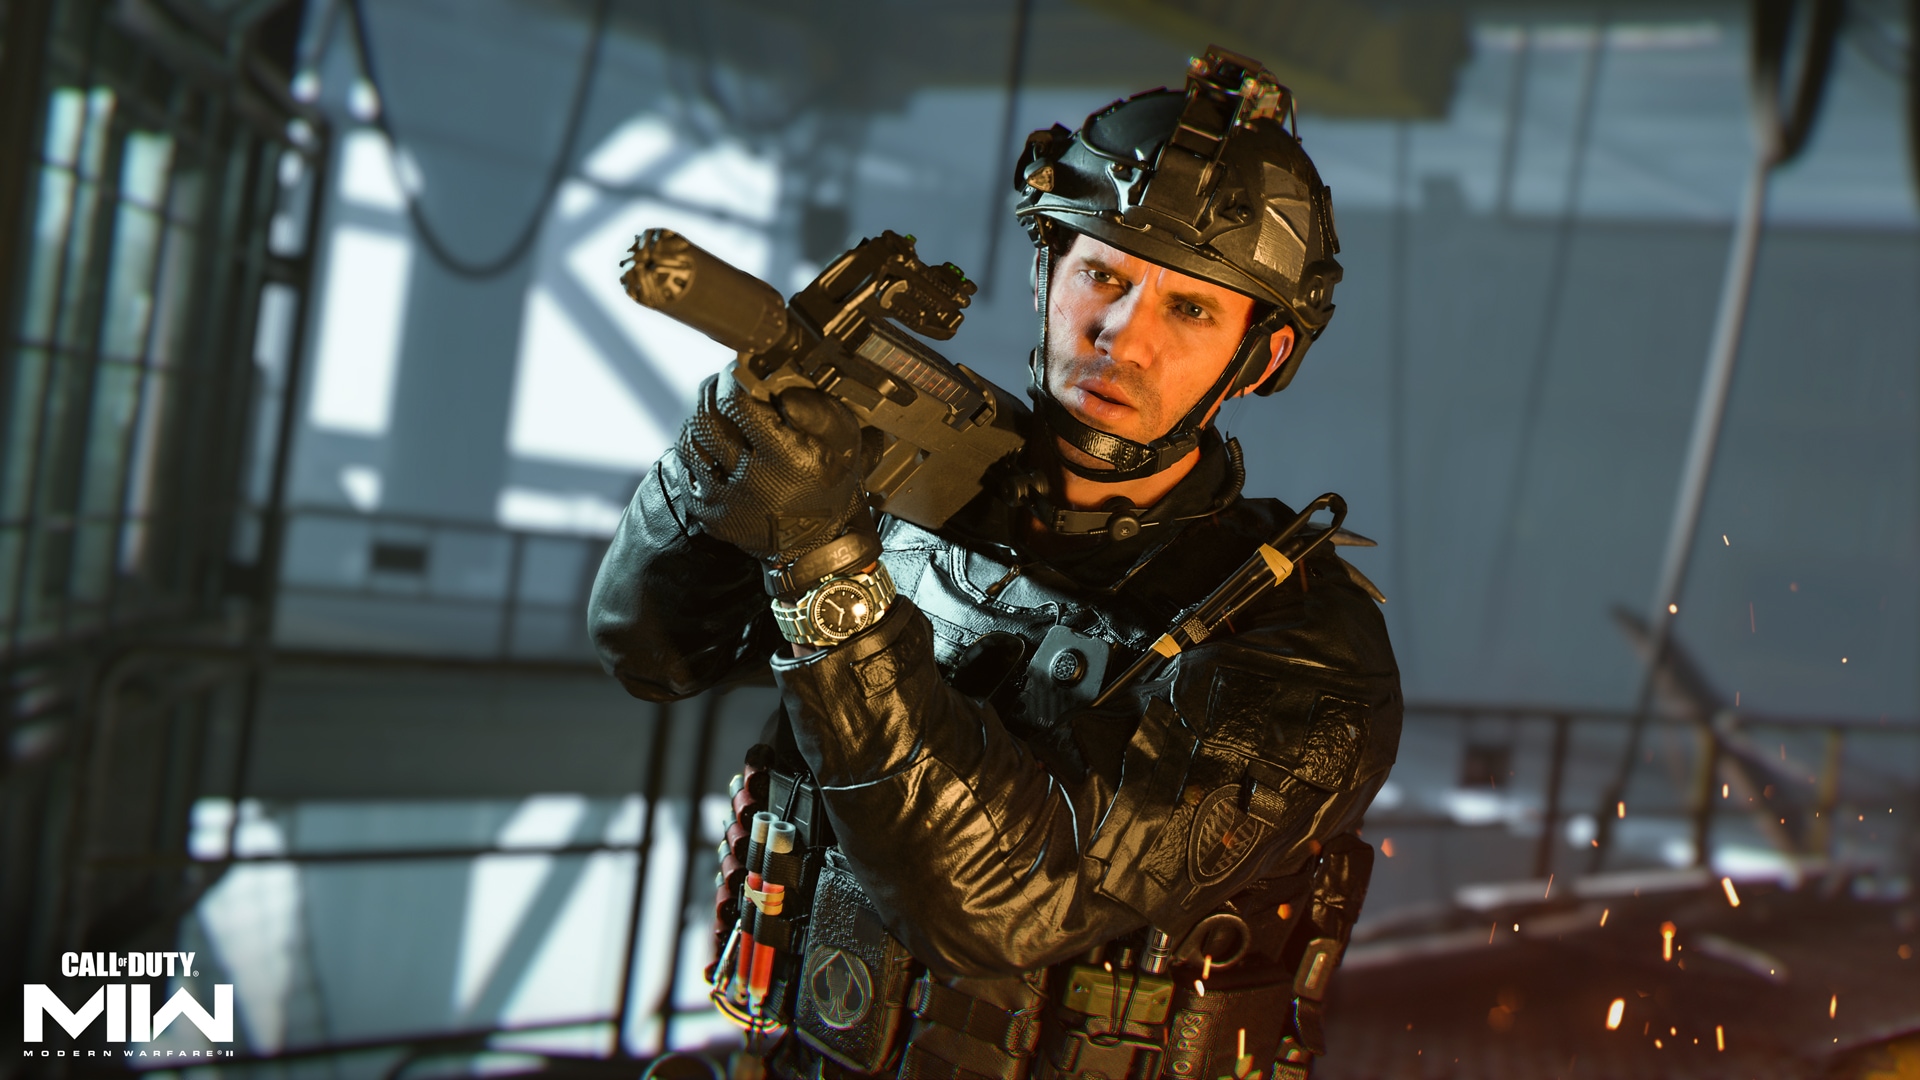 Activision confirms a new, innovative Call of Duty from Infinity Ward  will arrive in 2016